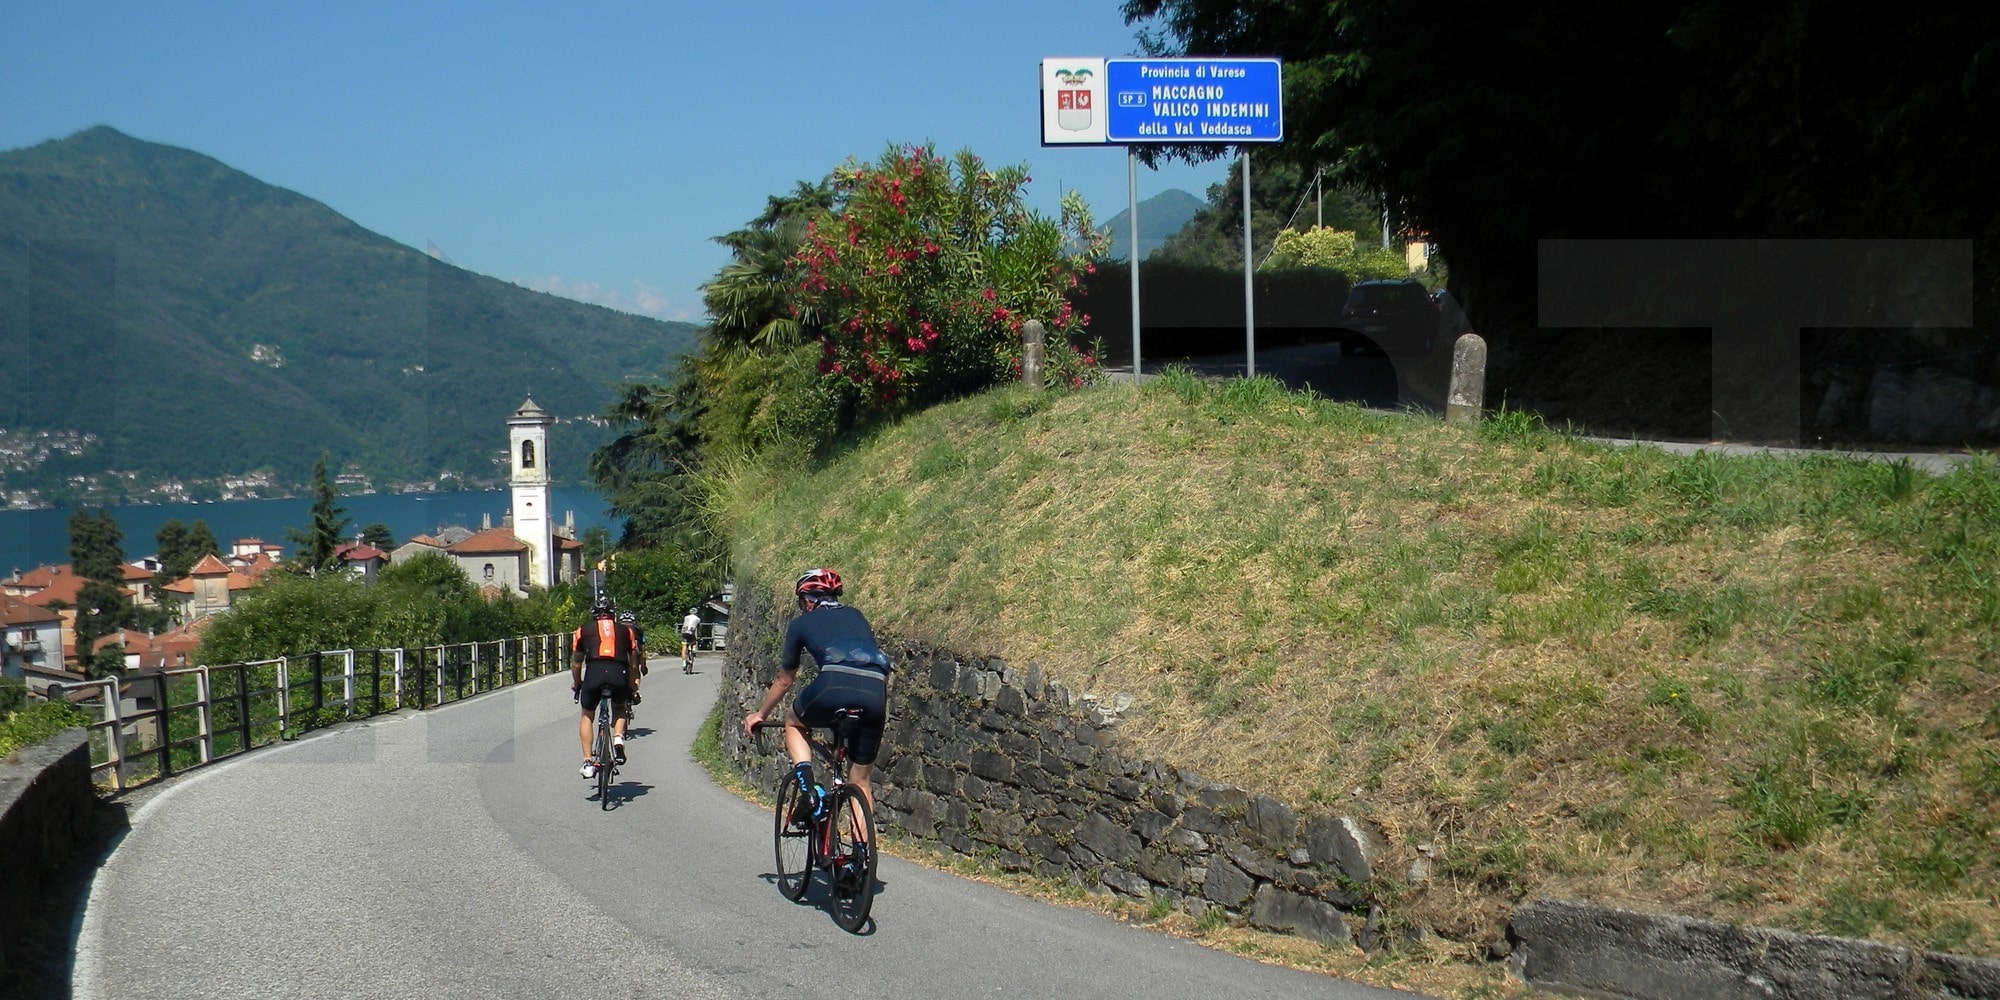 Lake Maggiore cycling experience